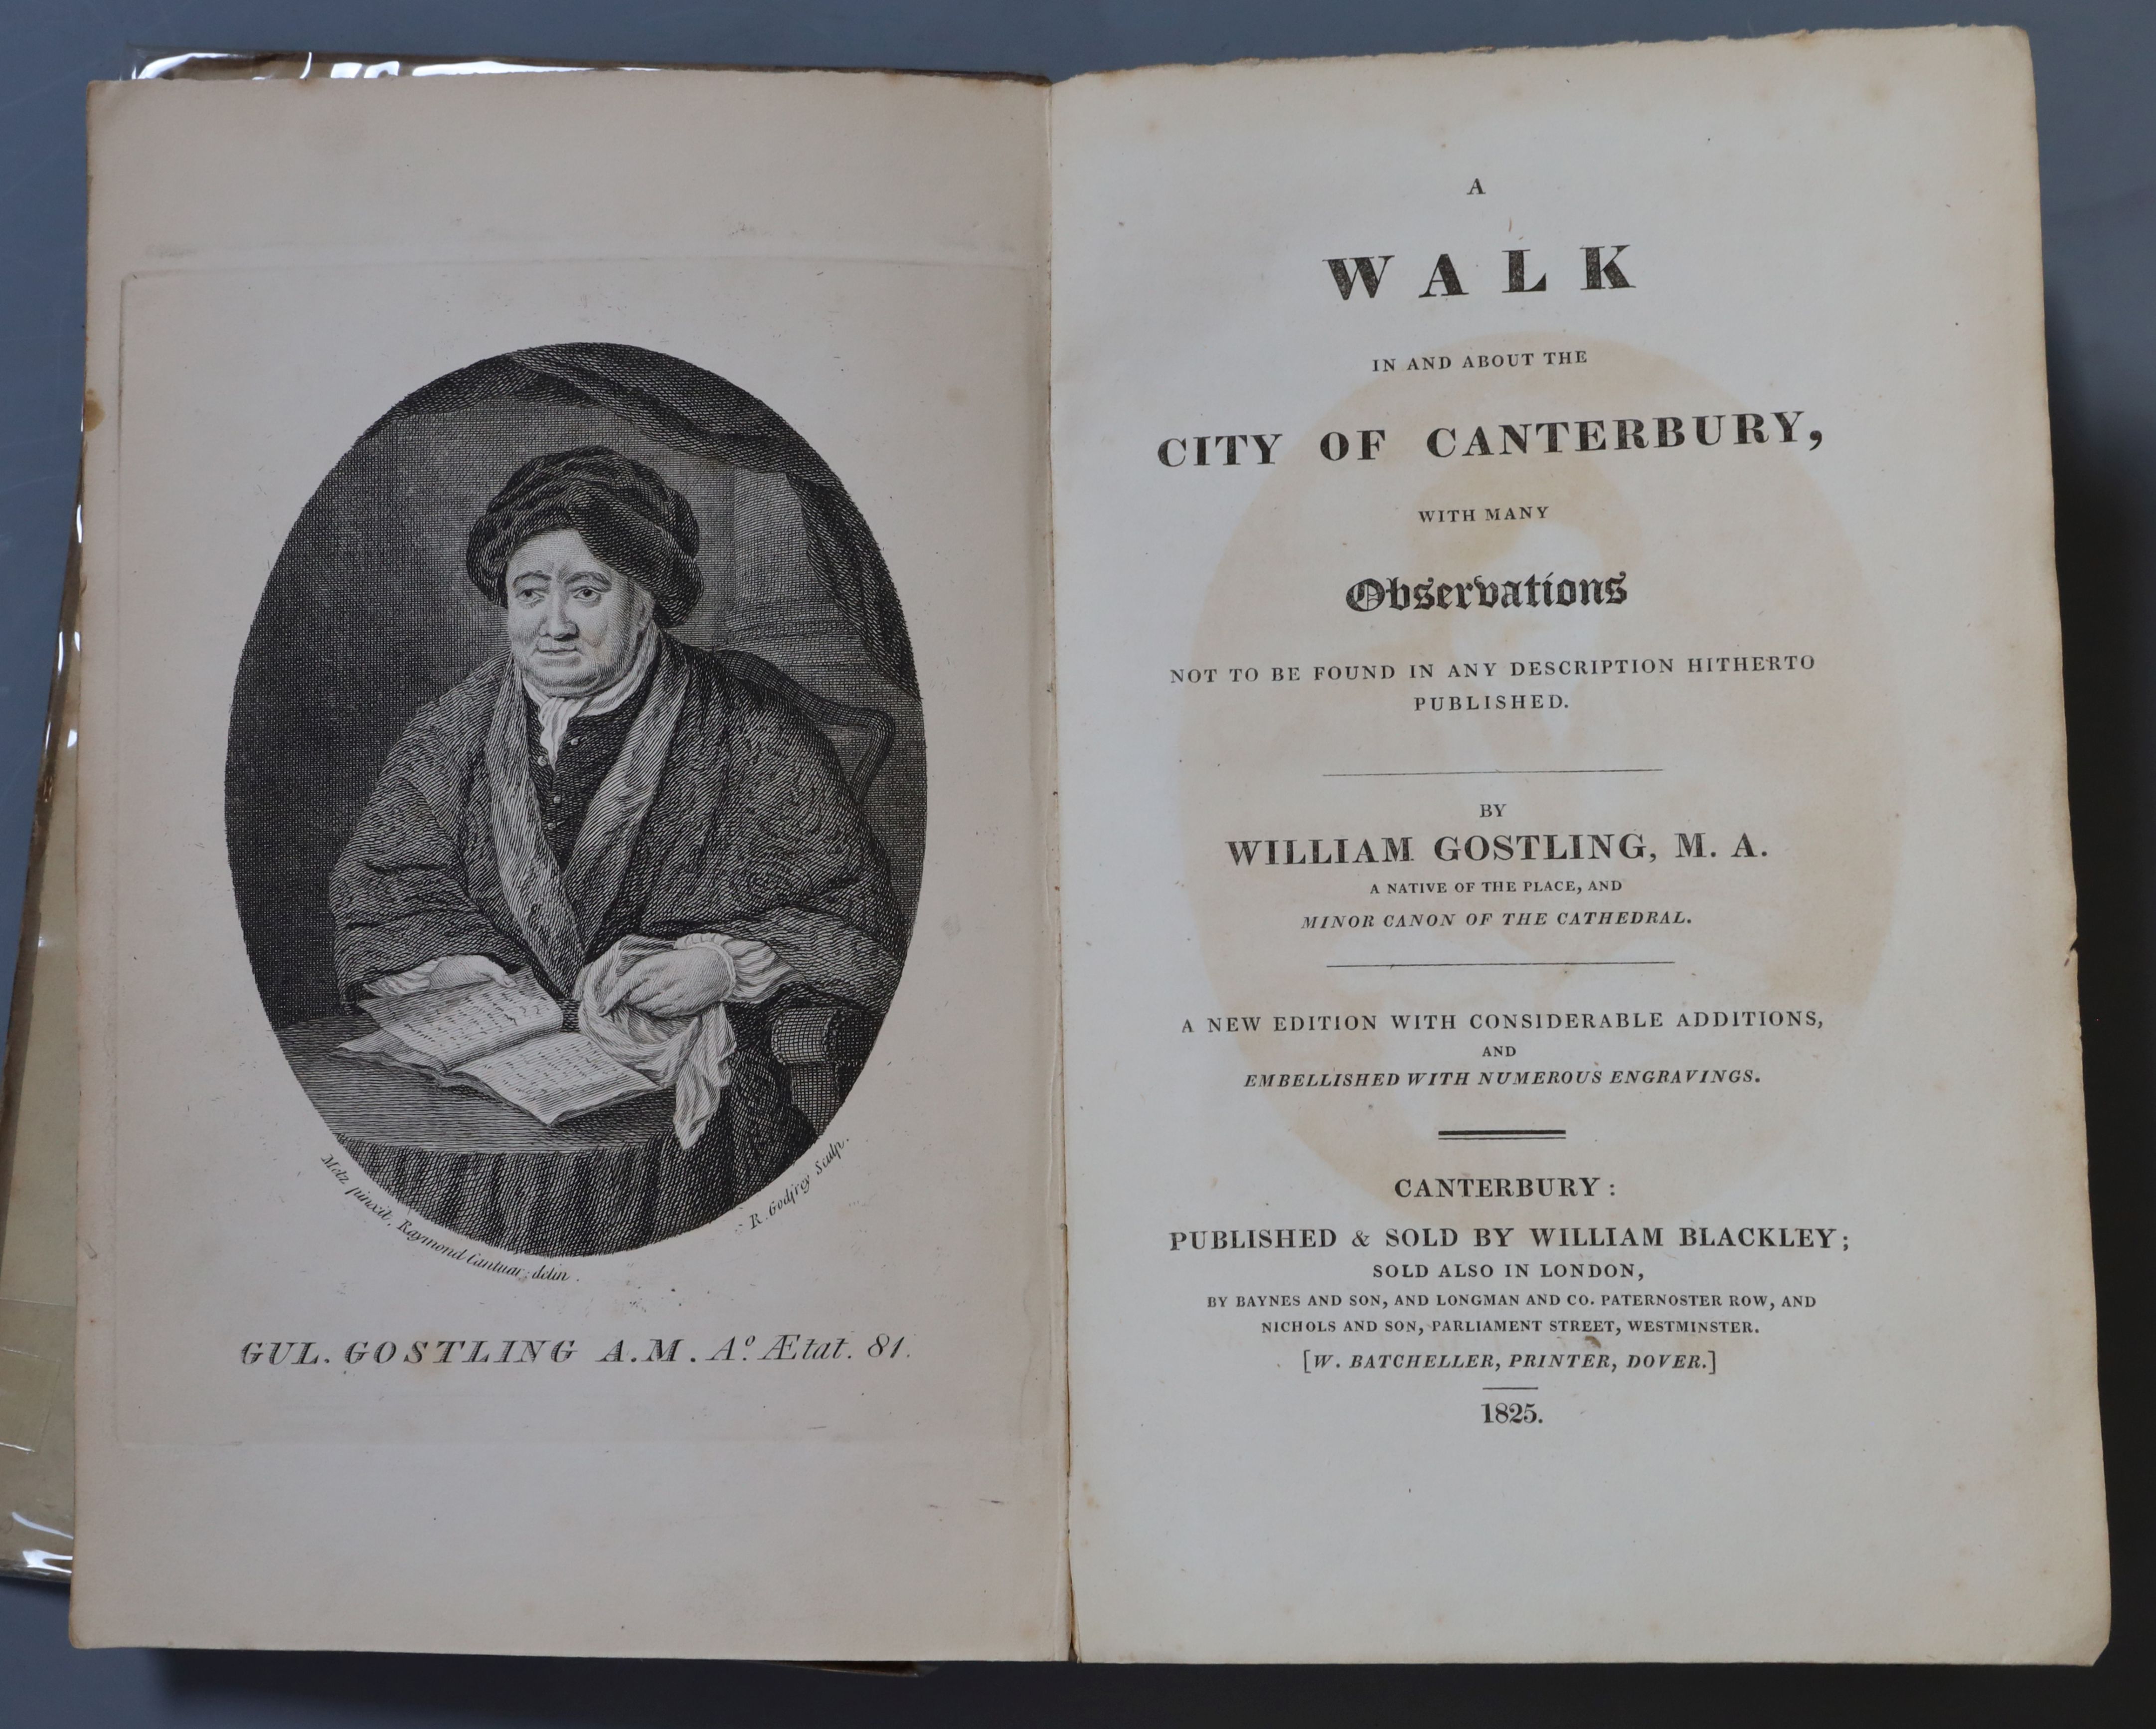 CANTERBURY: Gostling, William - A Walk in and about the City of Canterbury, New edition, 8vo, with